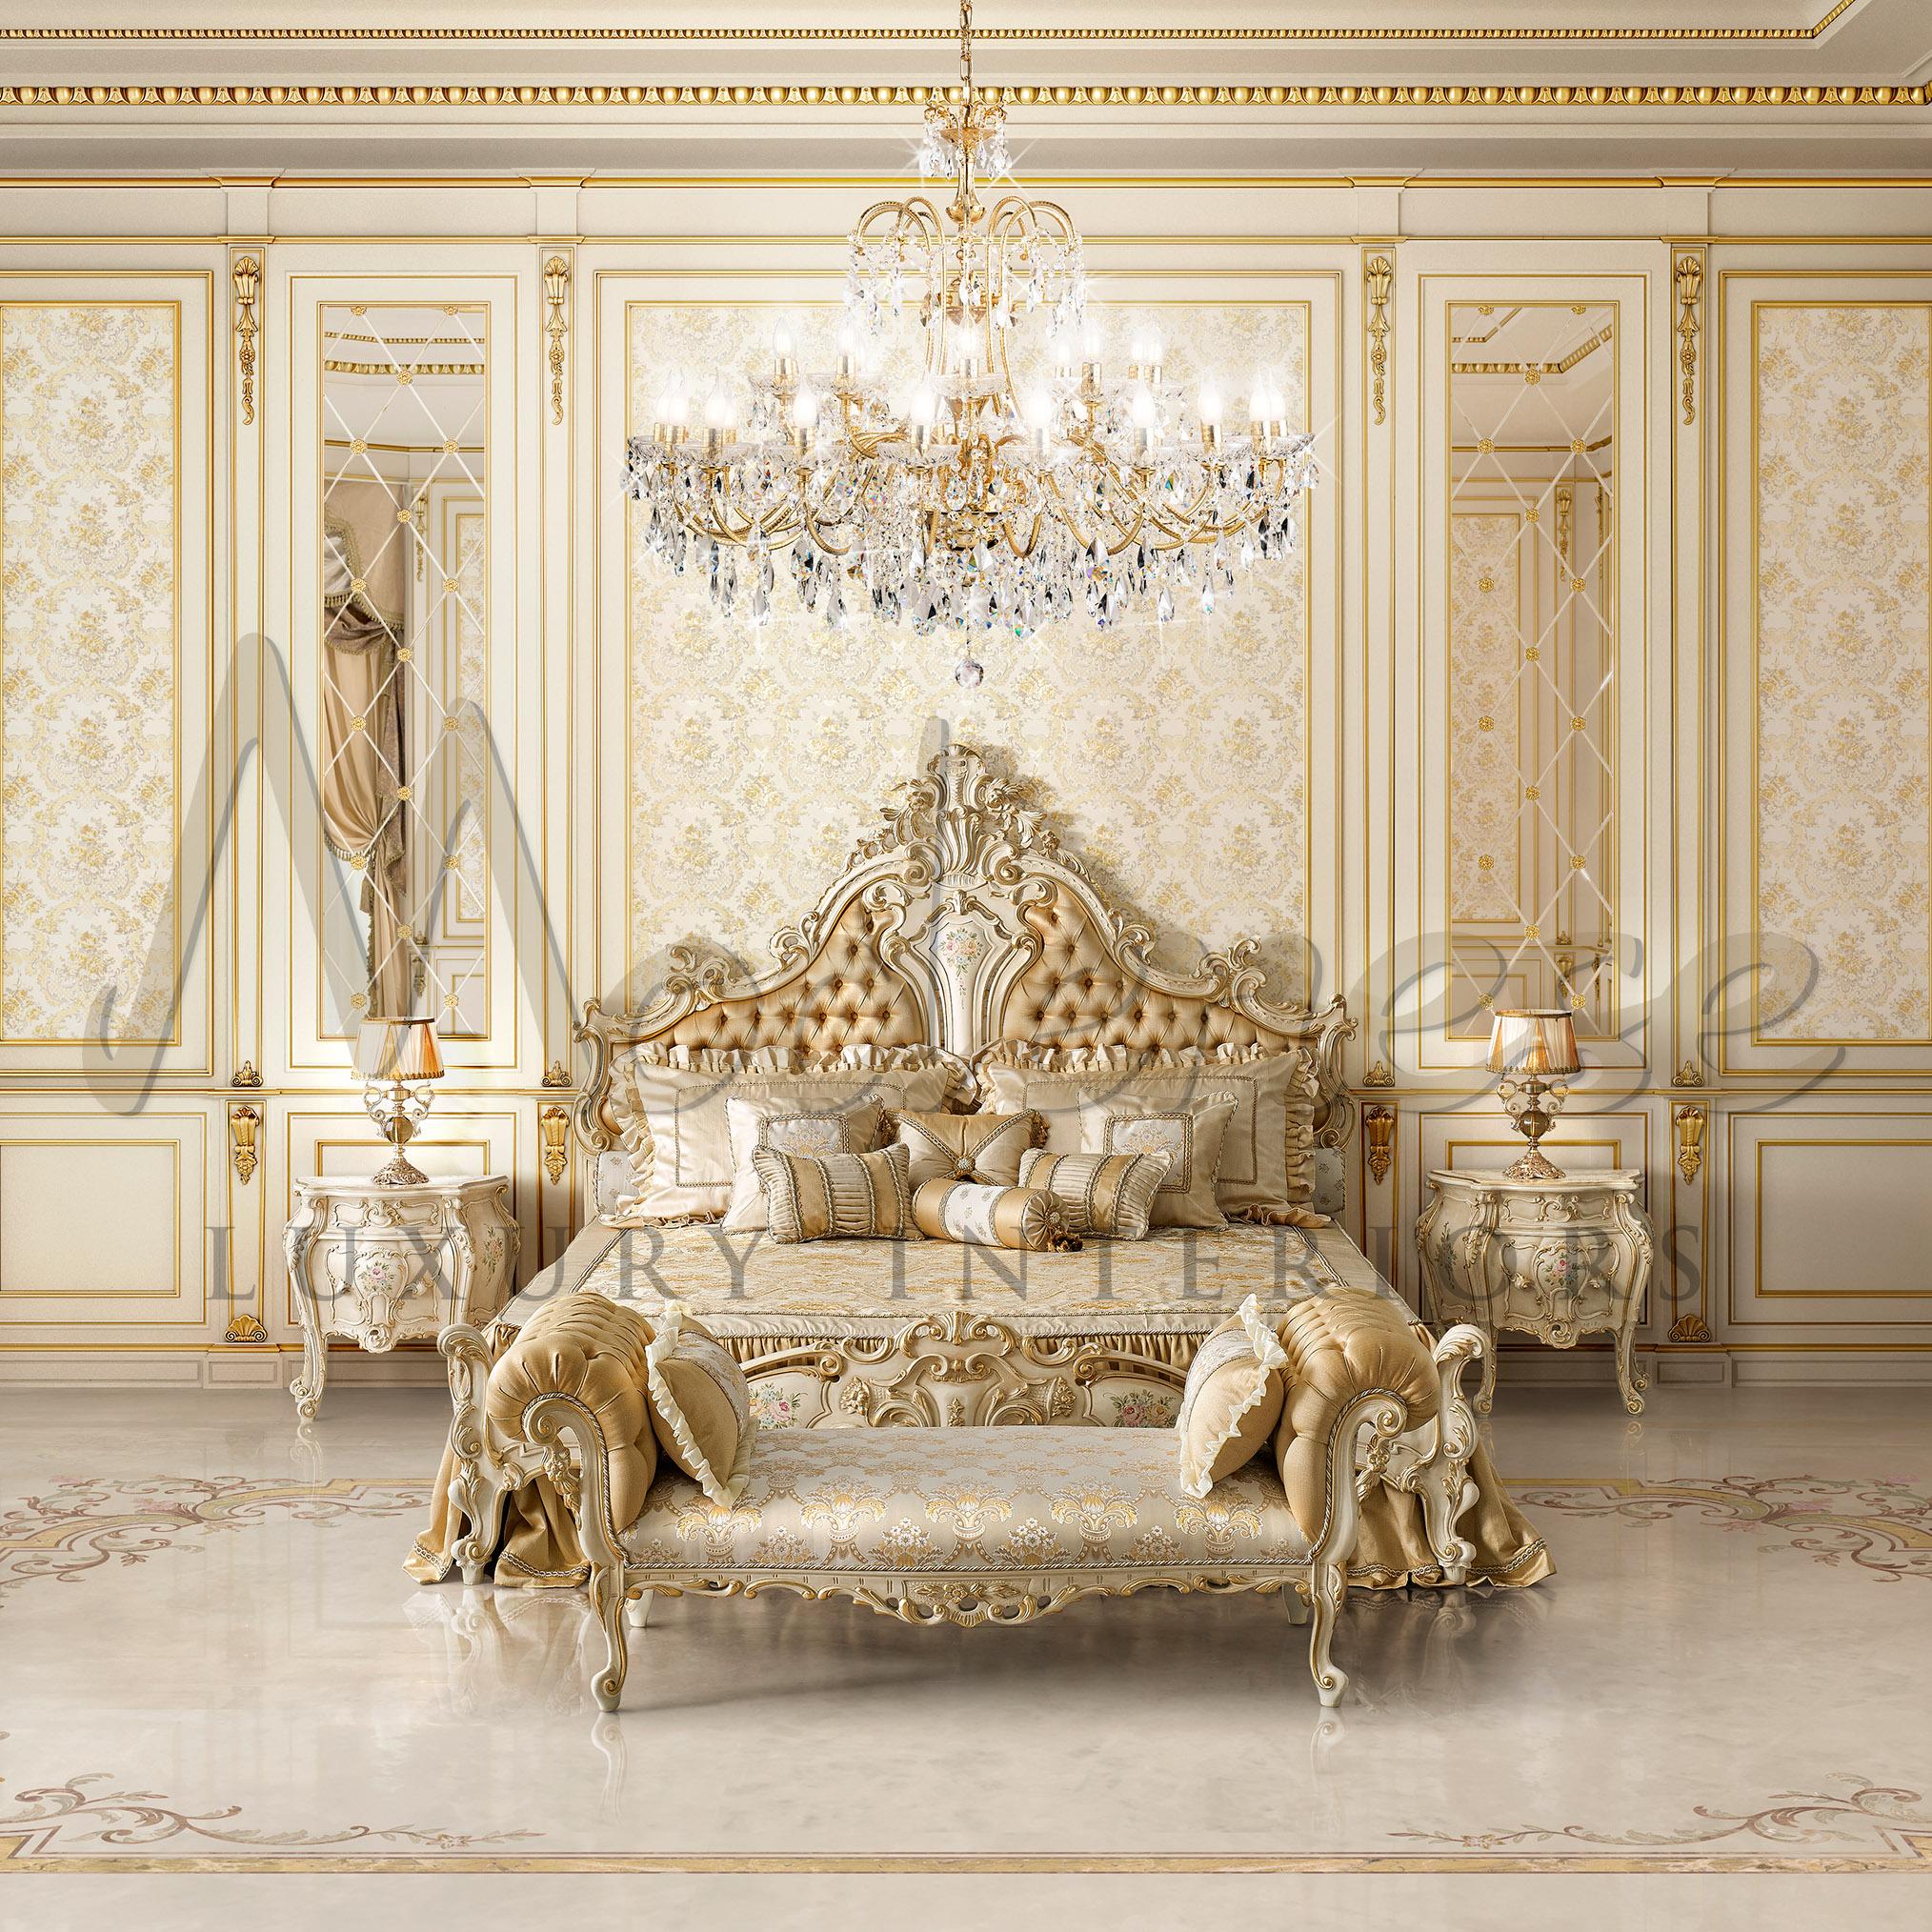 Monumental baroque chandelier especially designed by Modenese Luxury Interiors for luxury palaces and private villas. The 24kt gold leaf finished structure helds 30 light bulbs and tons of Scholler crystal pendants, that will enlight your room even